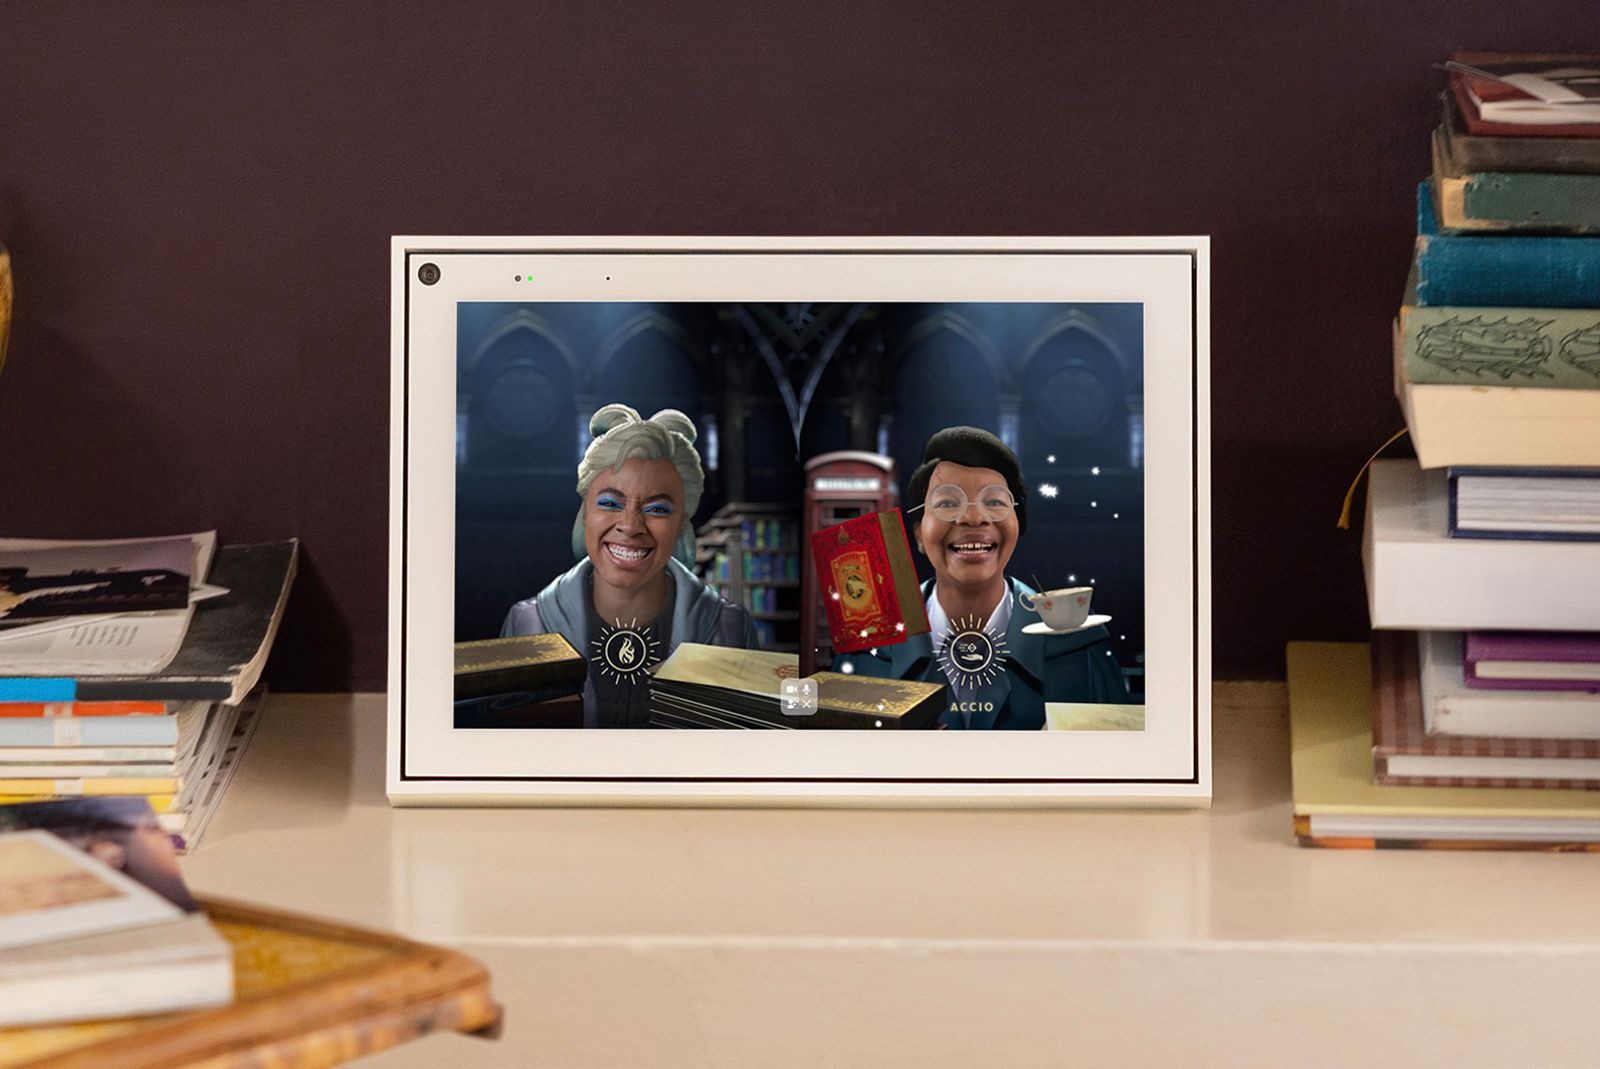 Facebook’s new AR feature for Portal lets you dress up as Harry Potter characters photo 2